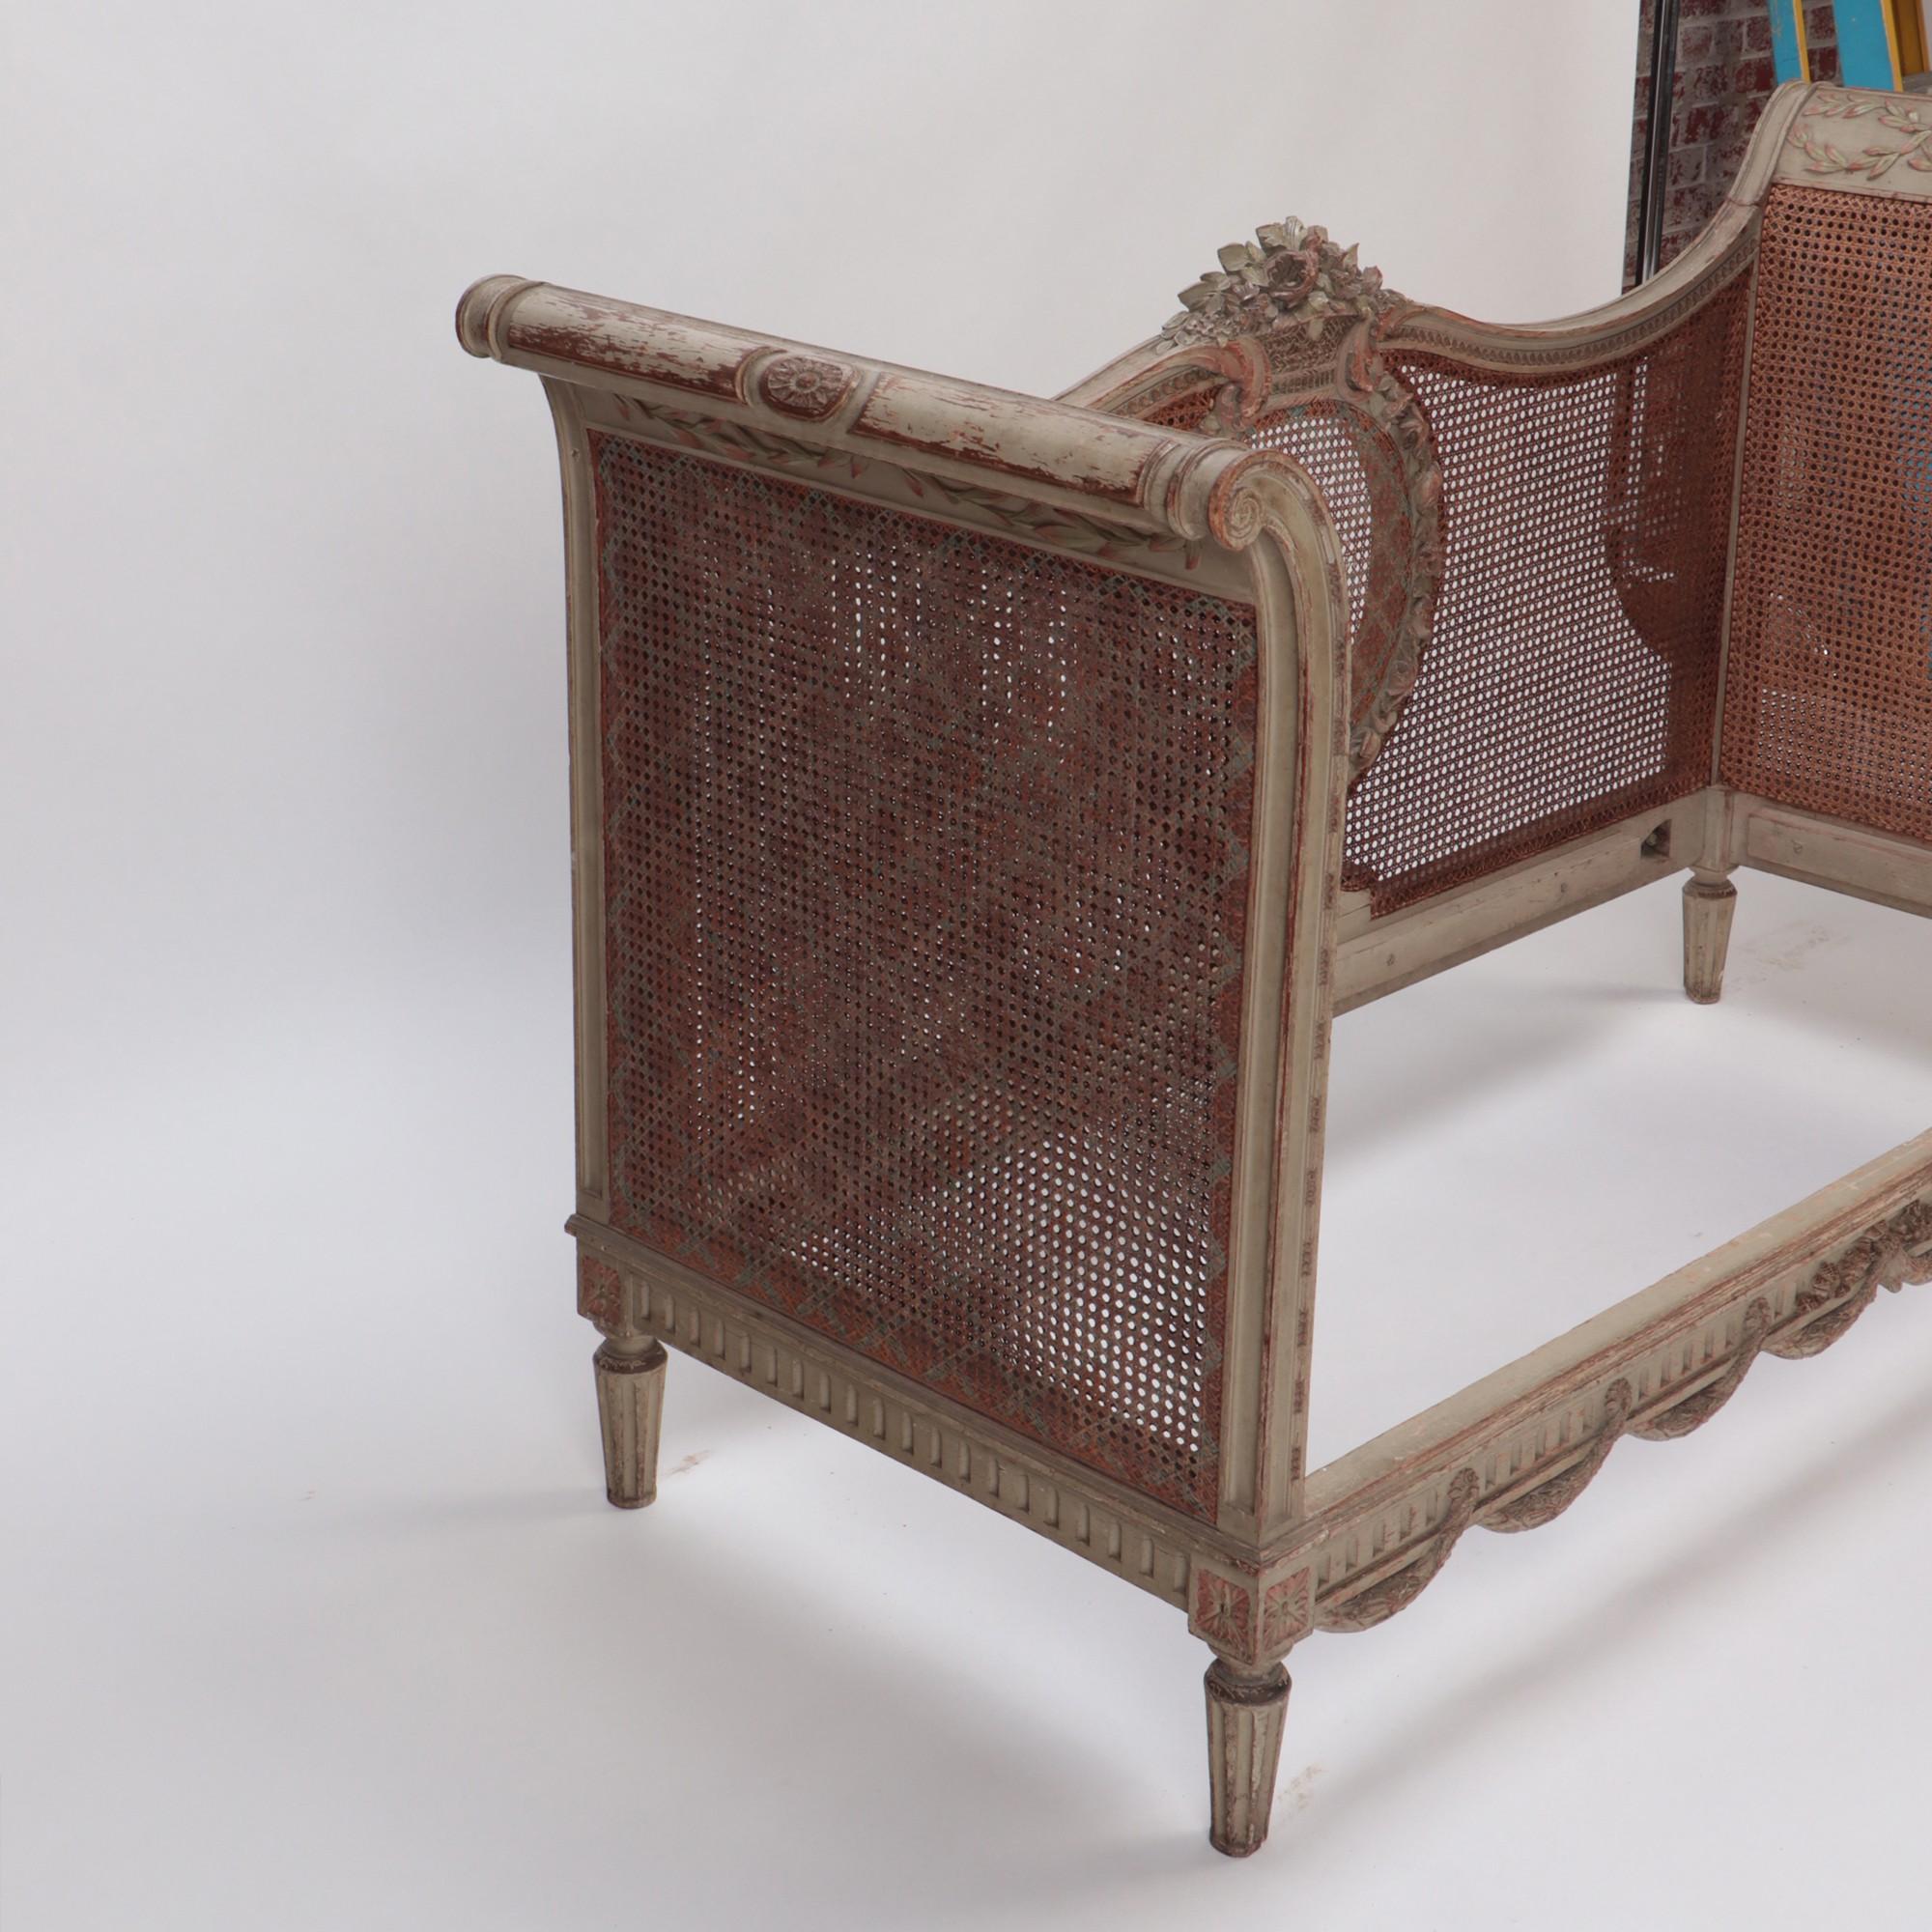 A late 19th century French Directoire painted cane daybed/settee. C 1880. Very decorative item with original patina.